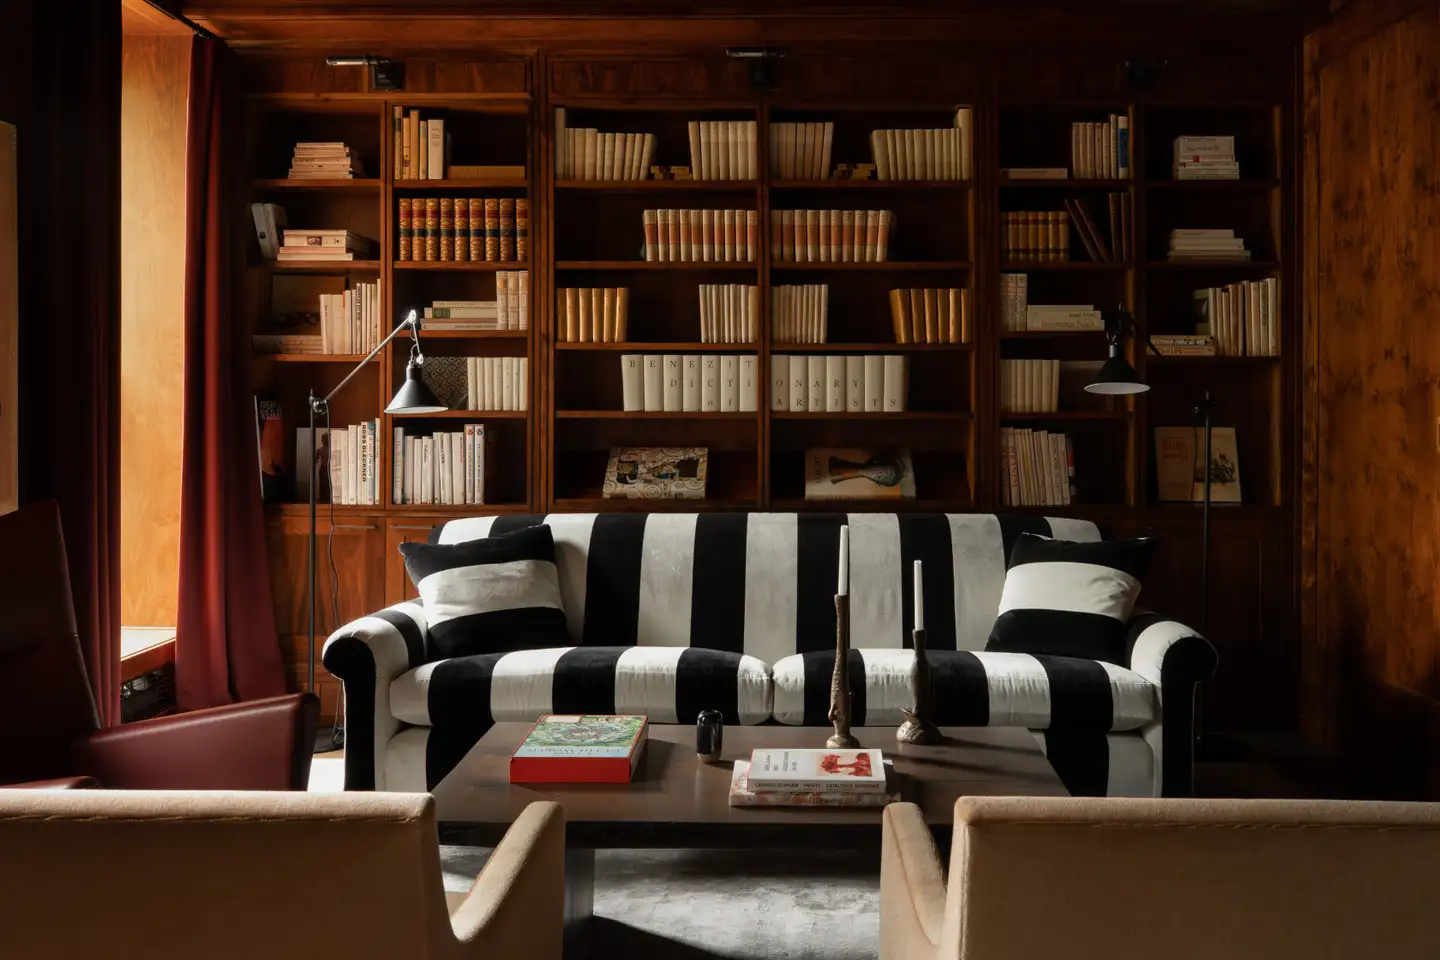 English-style black and white striped sofa that contrasts with the rest of the study